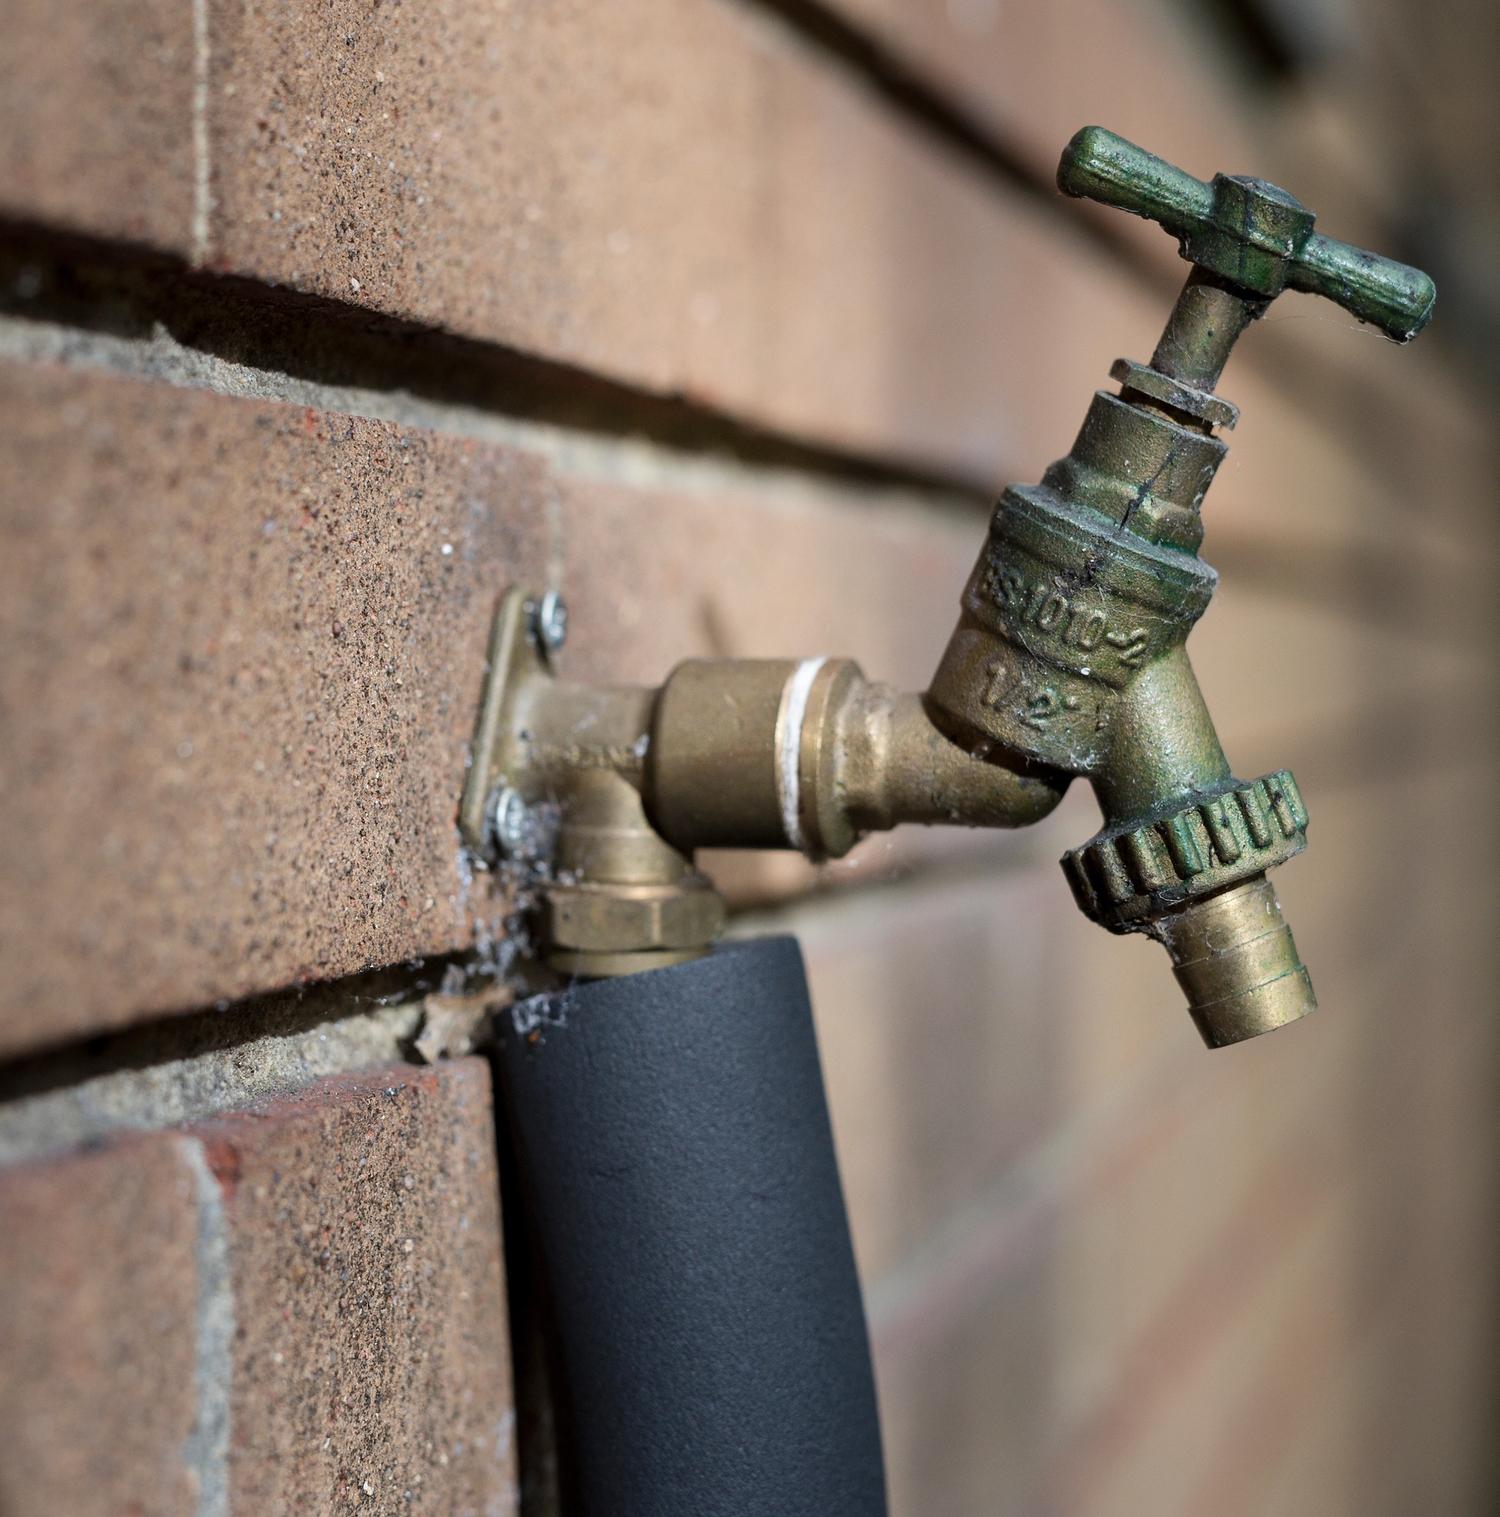 Outdoor tap with pipe lagging